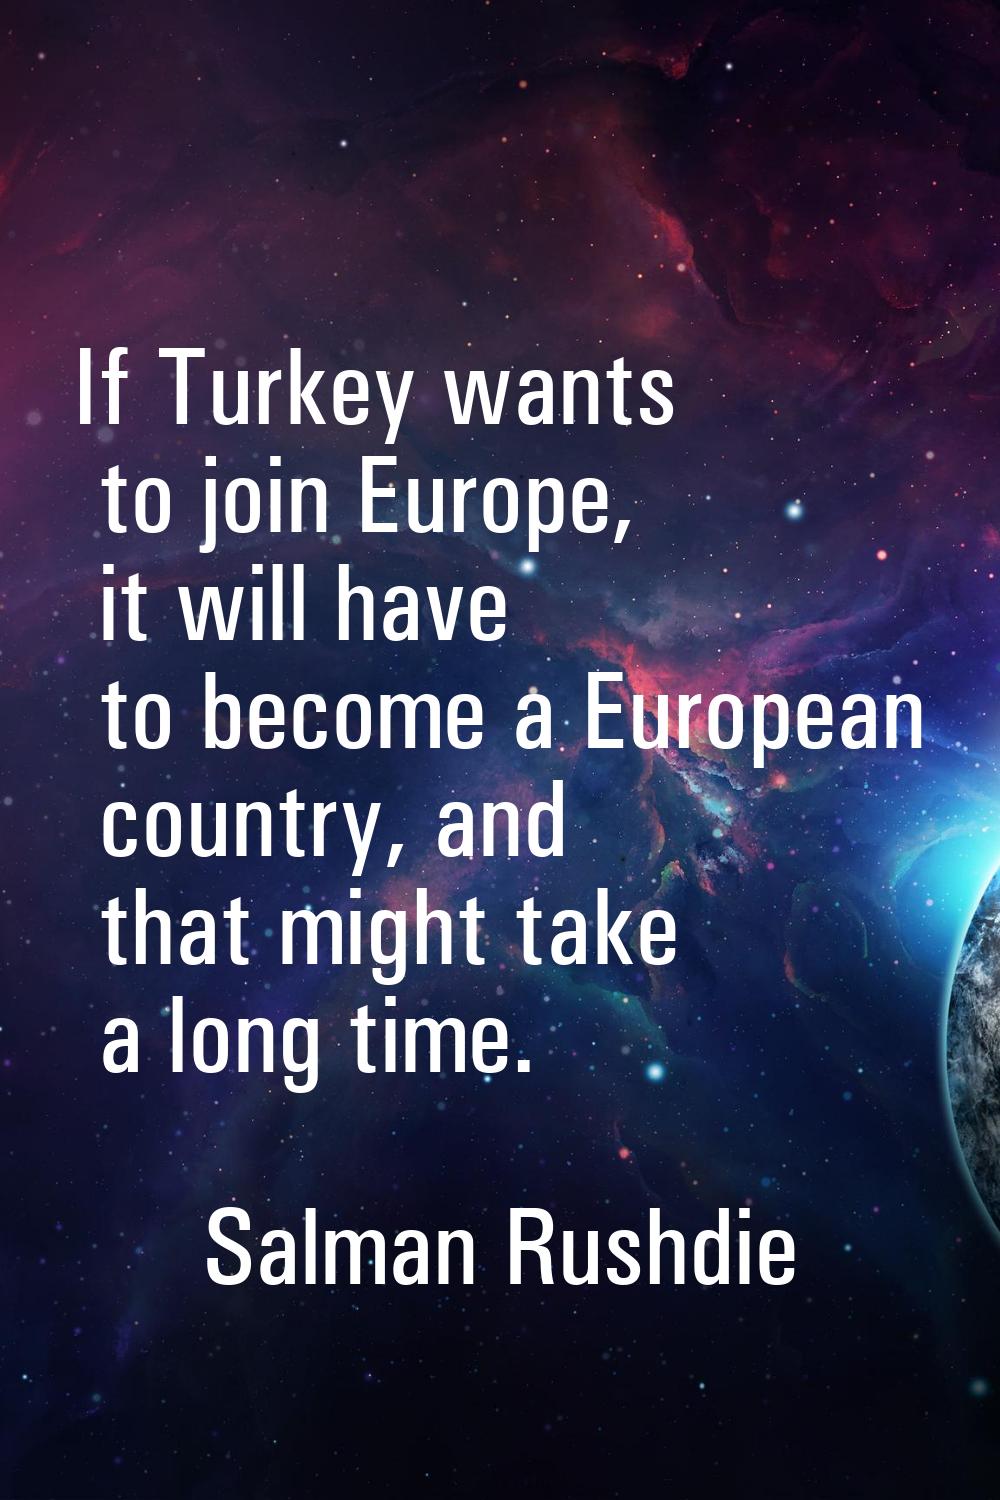 If Turkey wants to join Europe, it will have to become a European country, and that might take a lo